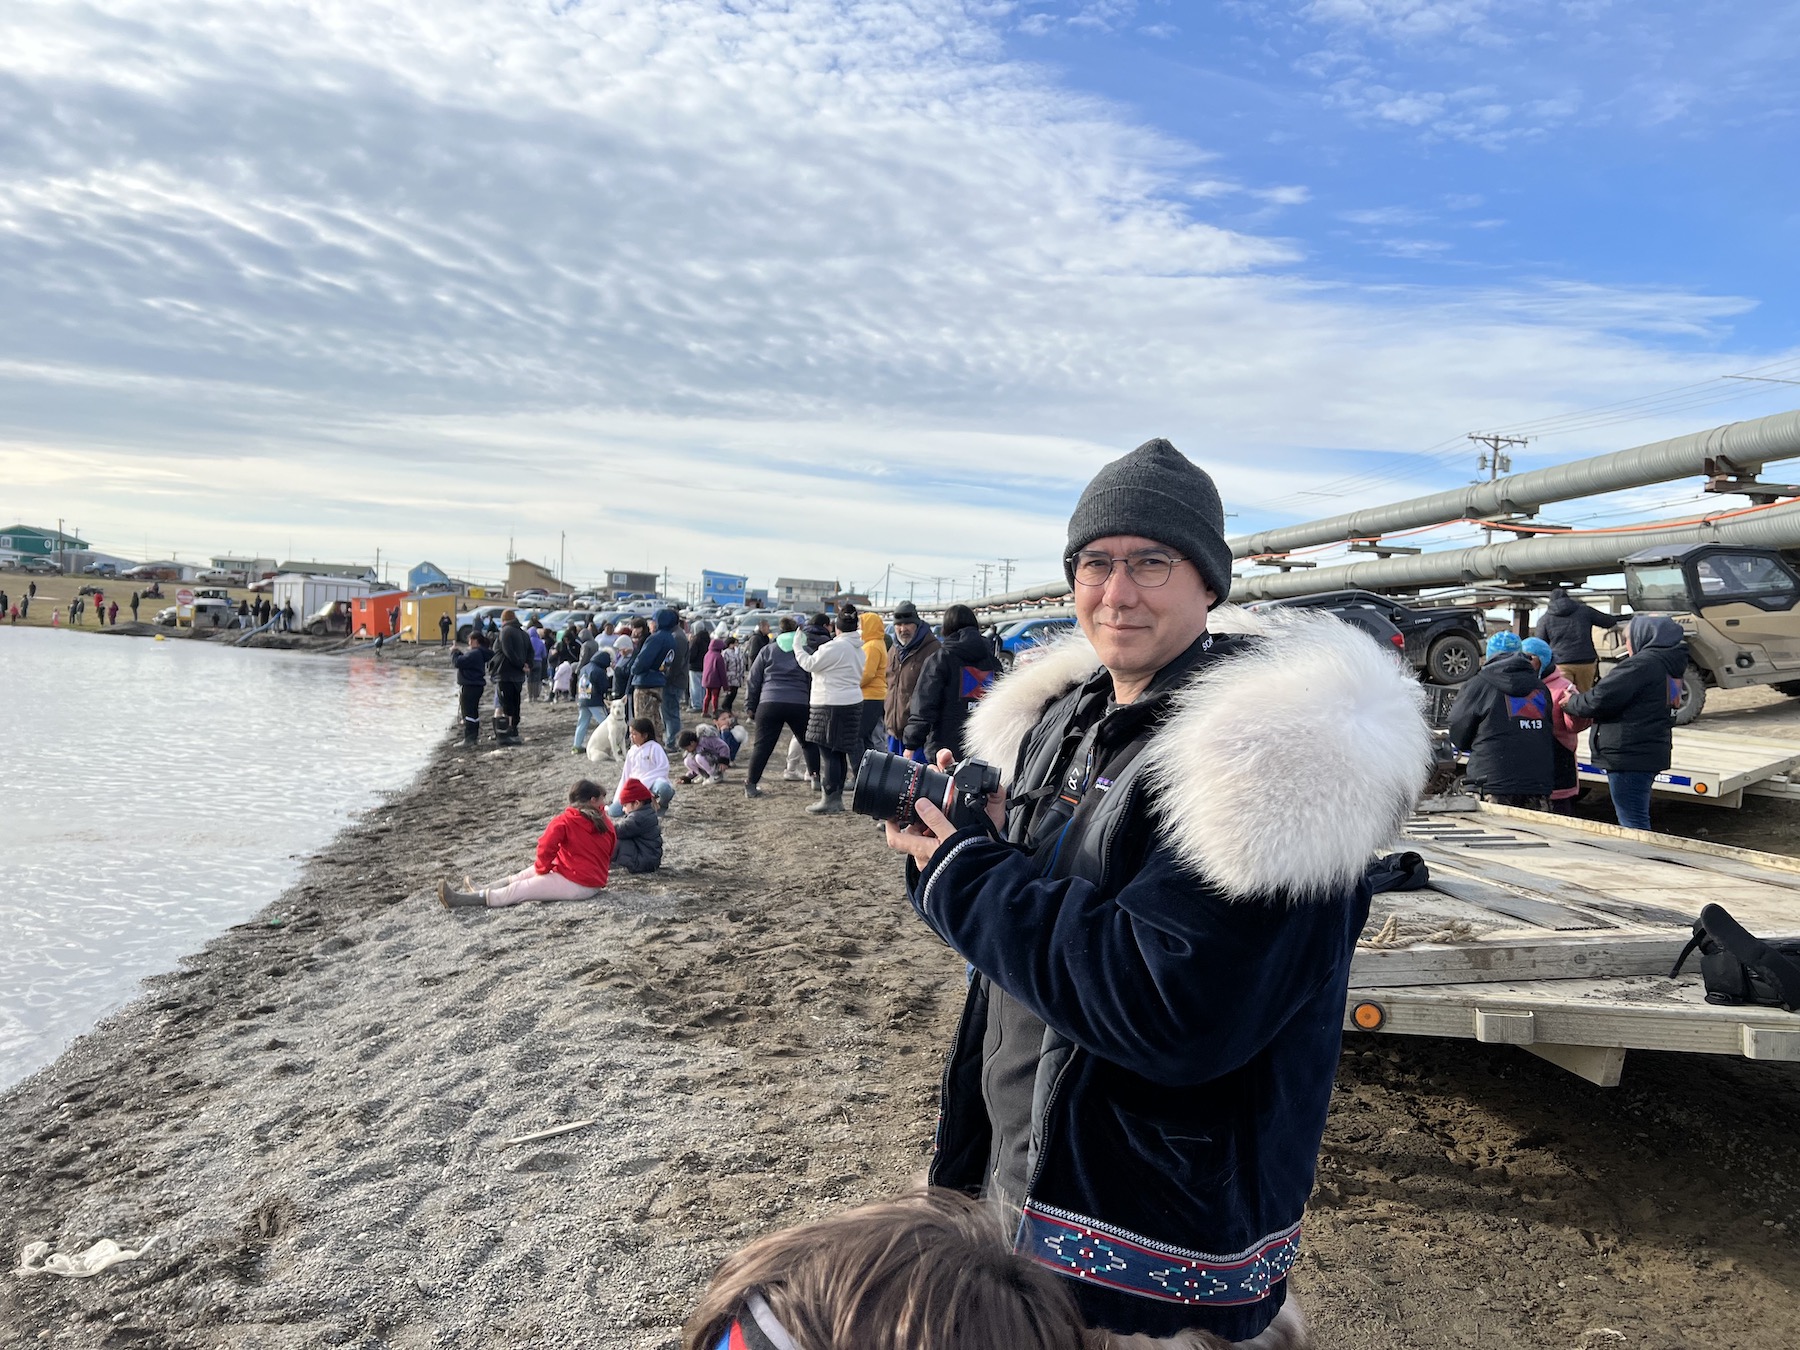 MacLean stands in a fur coat on a beach holding a camera